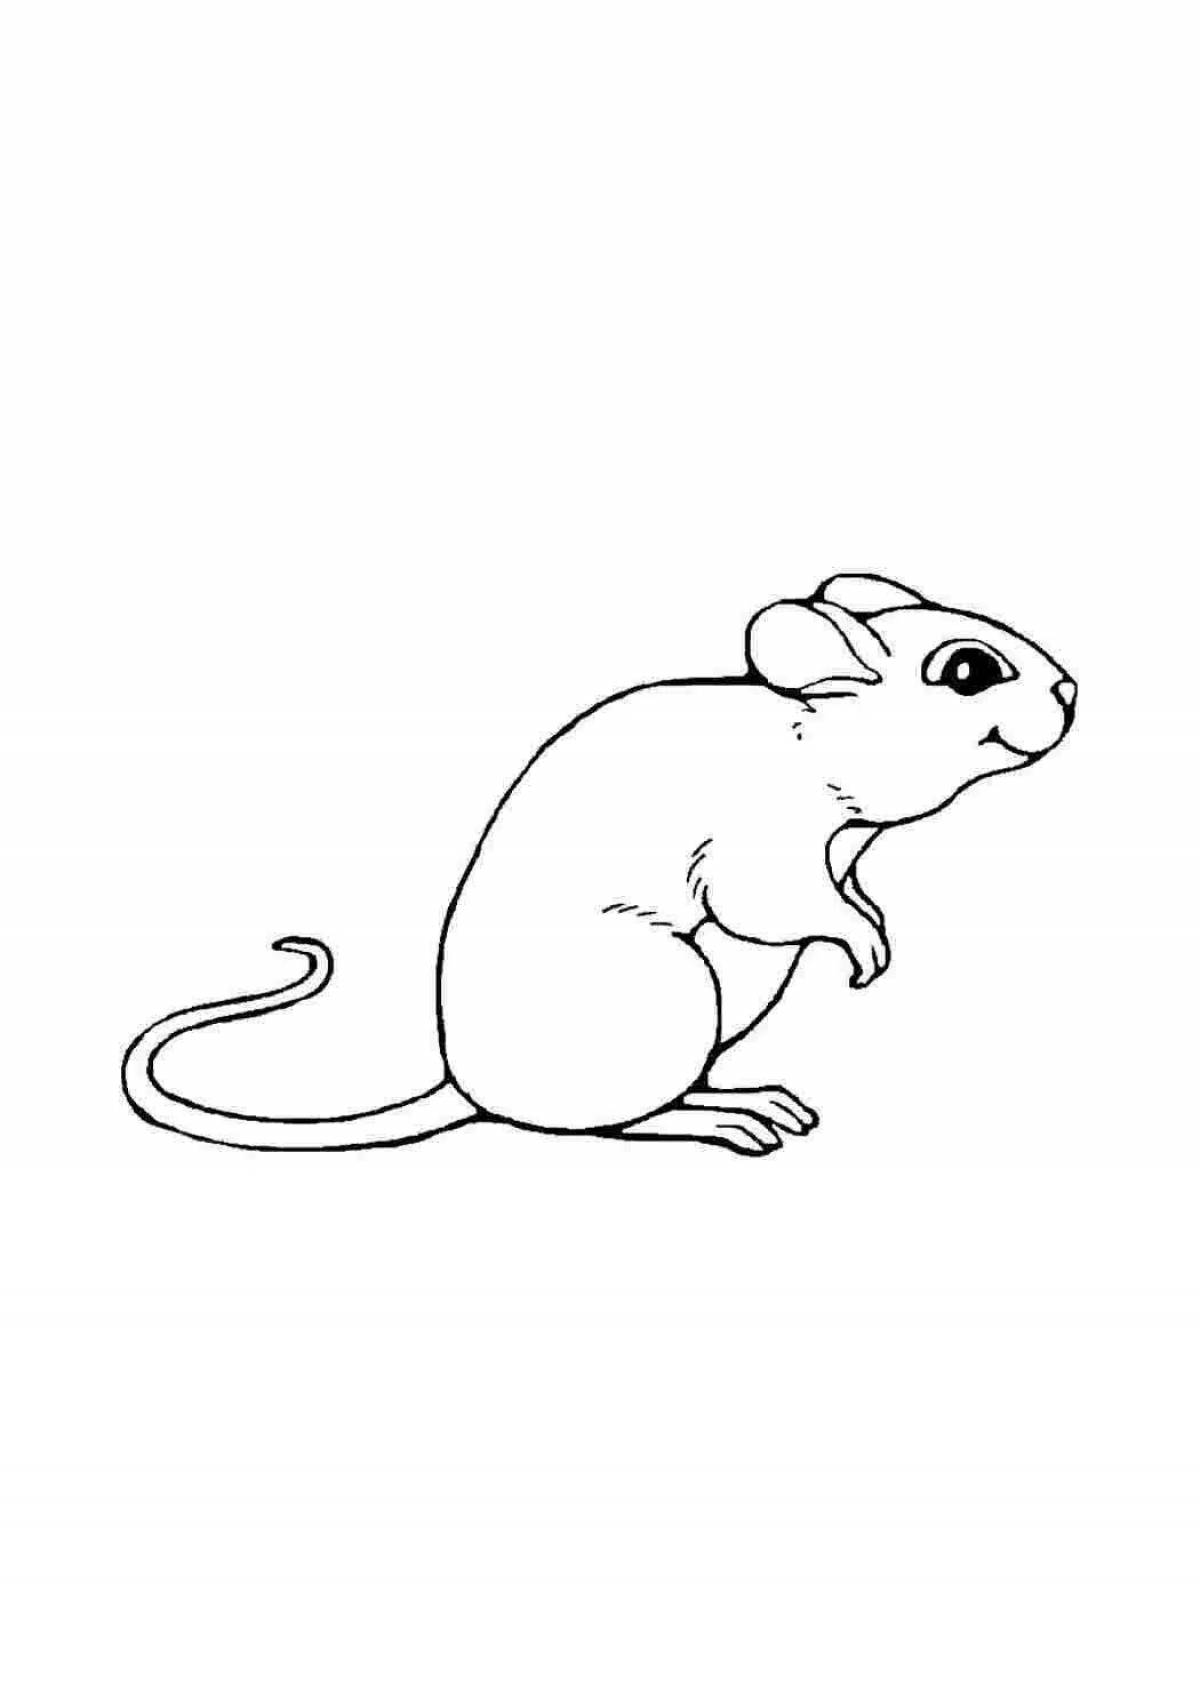 Playful mouse drawing